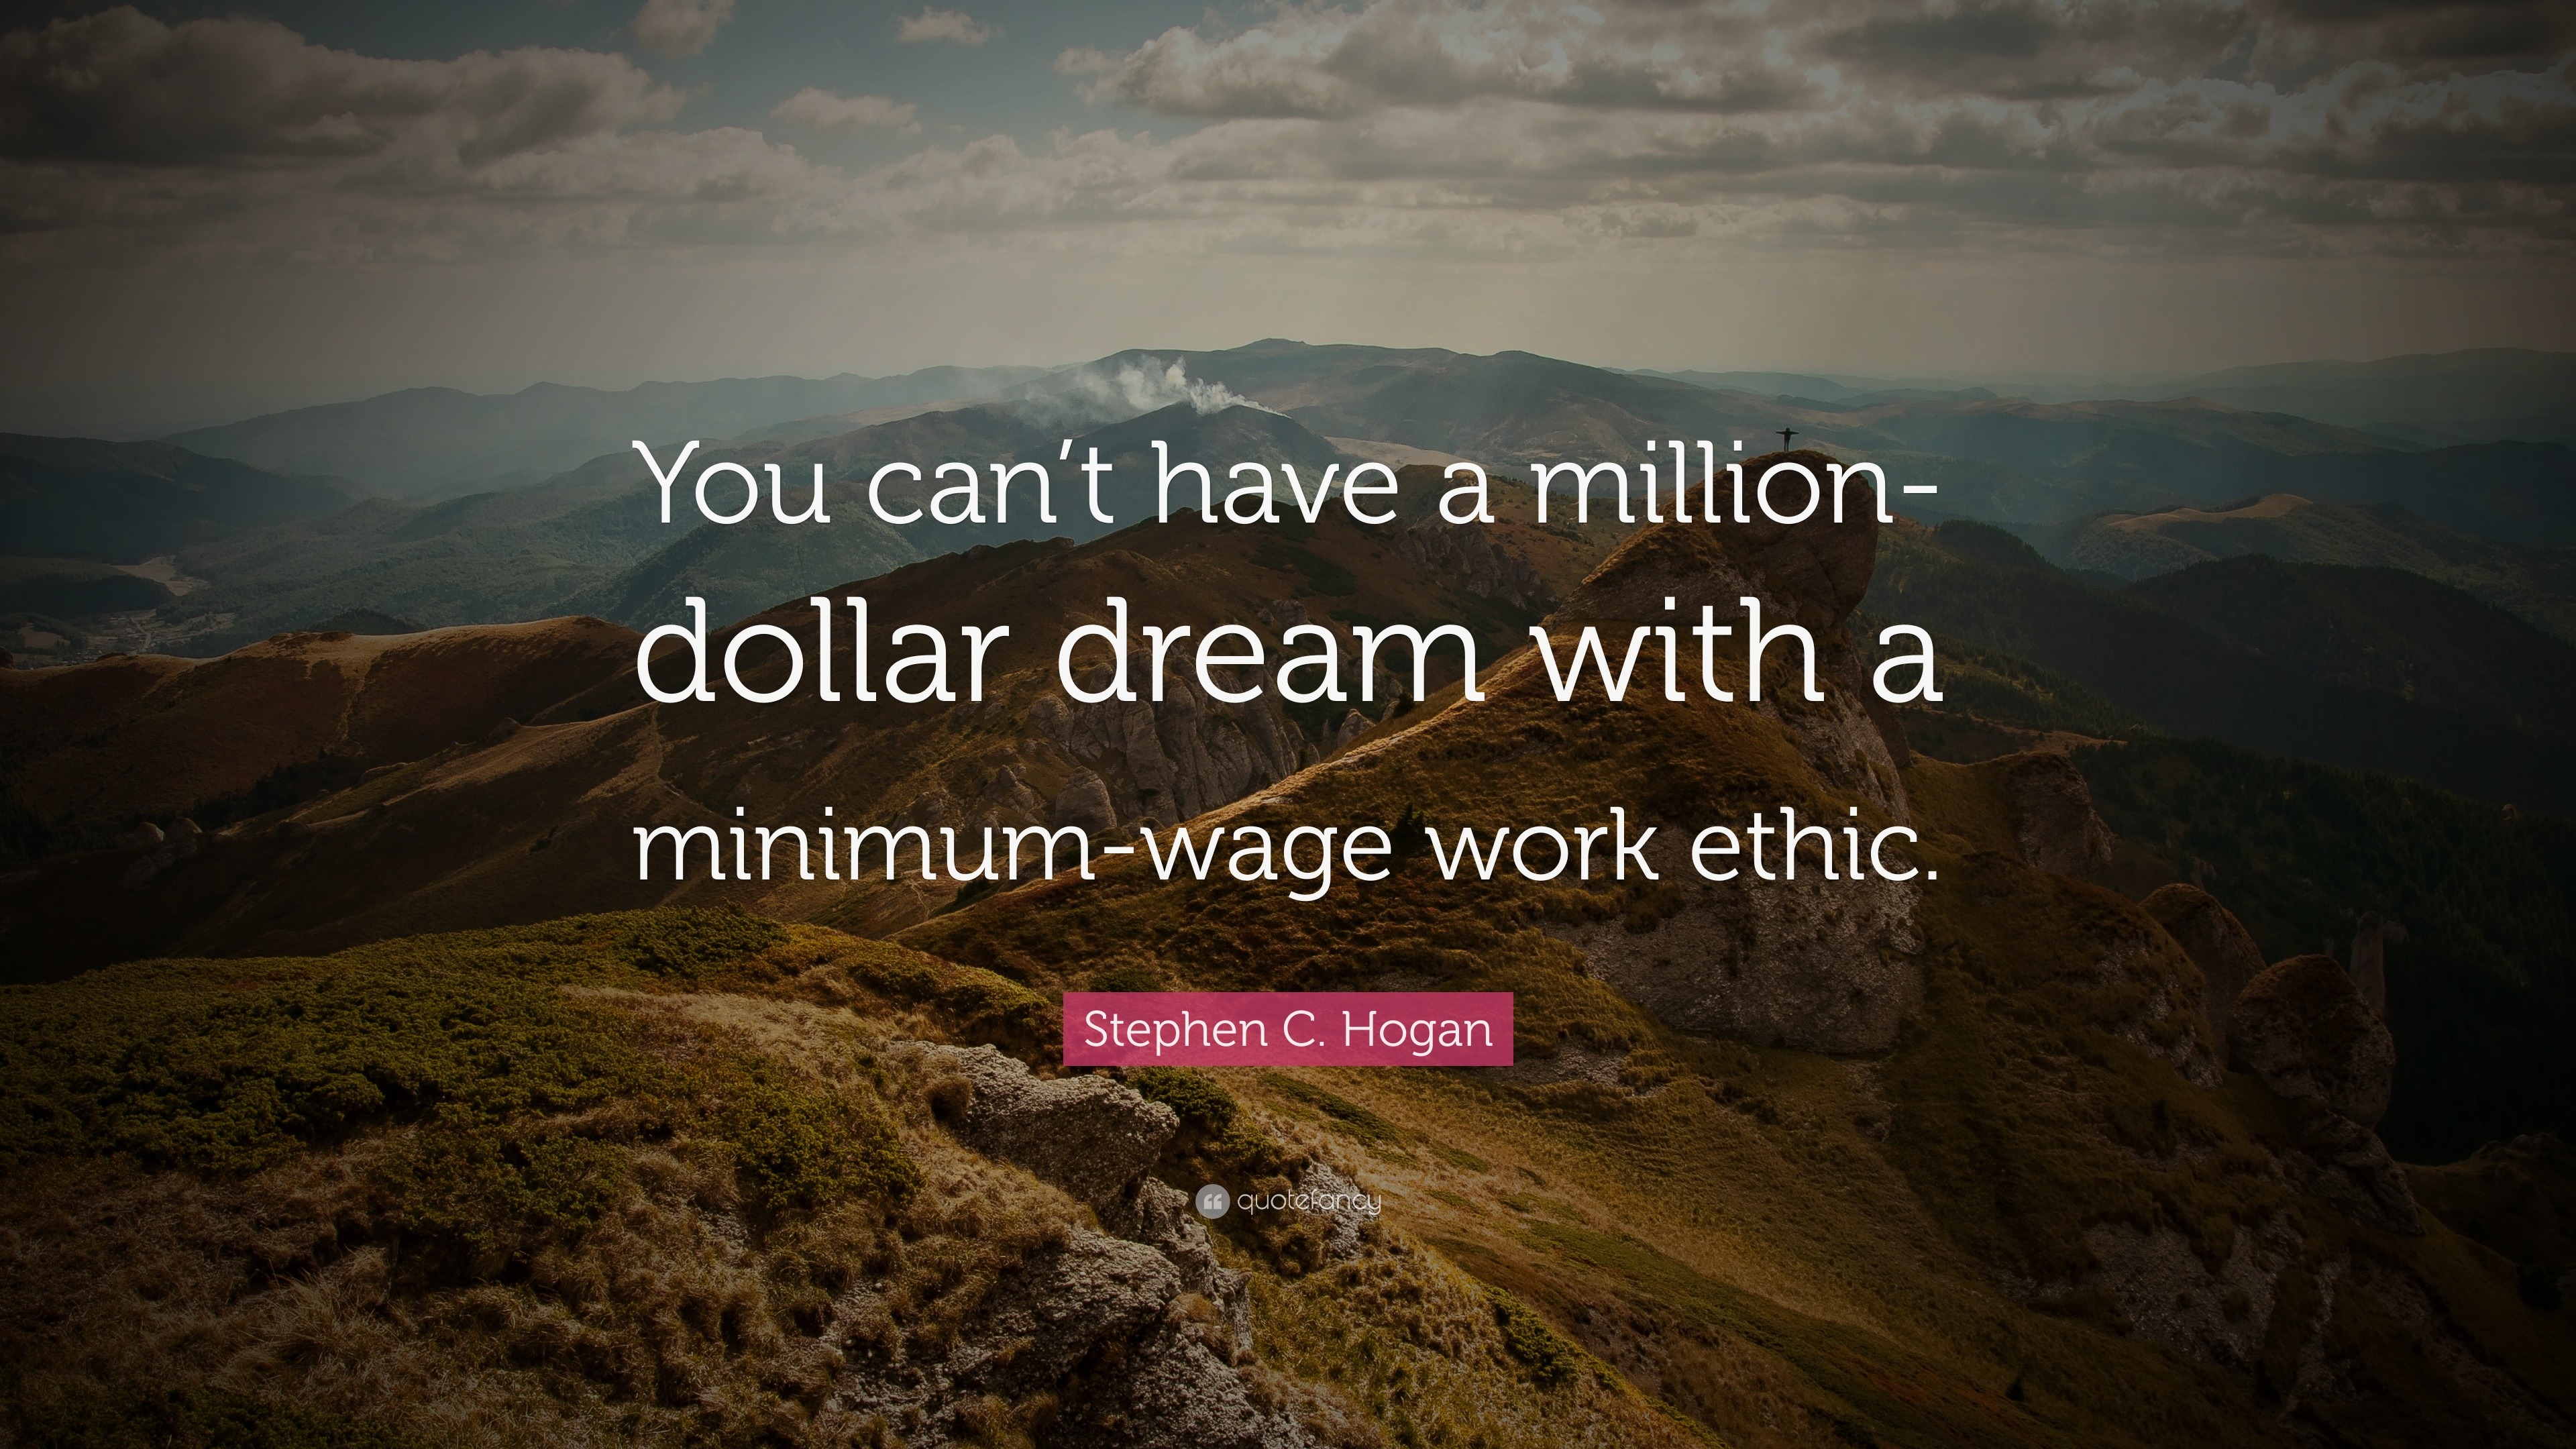 Stephen C. Hogan Quote: “You can’t have a million-dollar dream with a